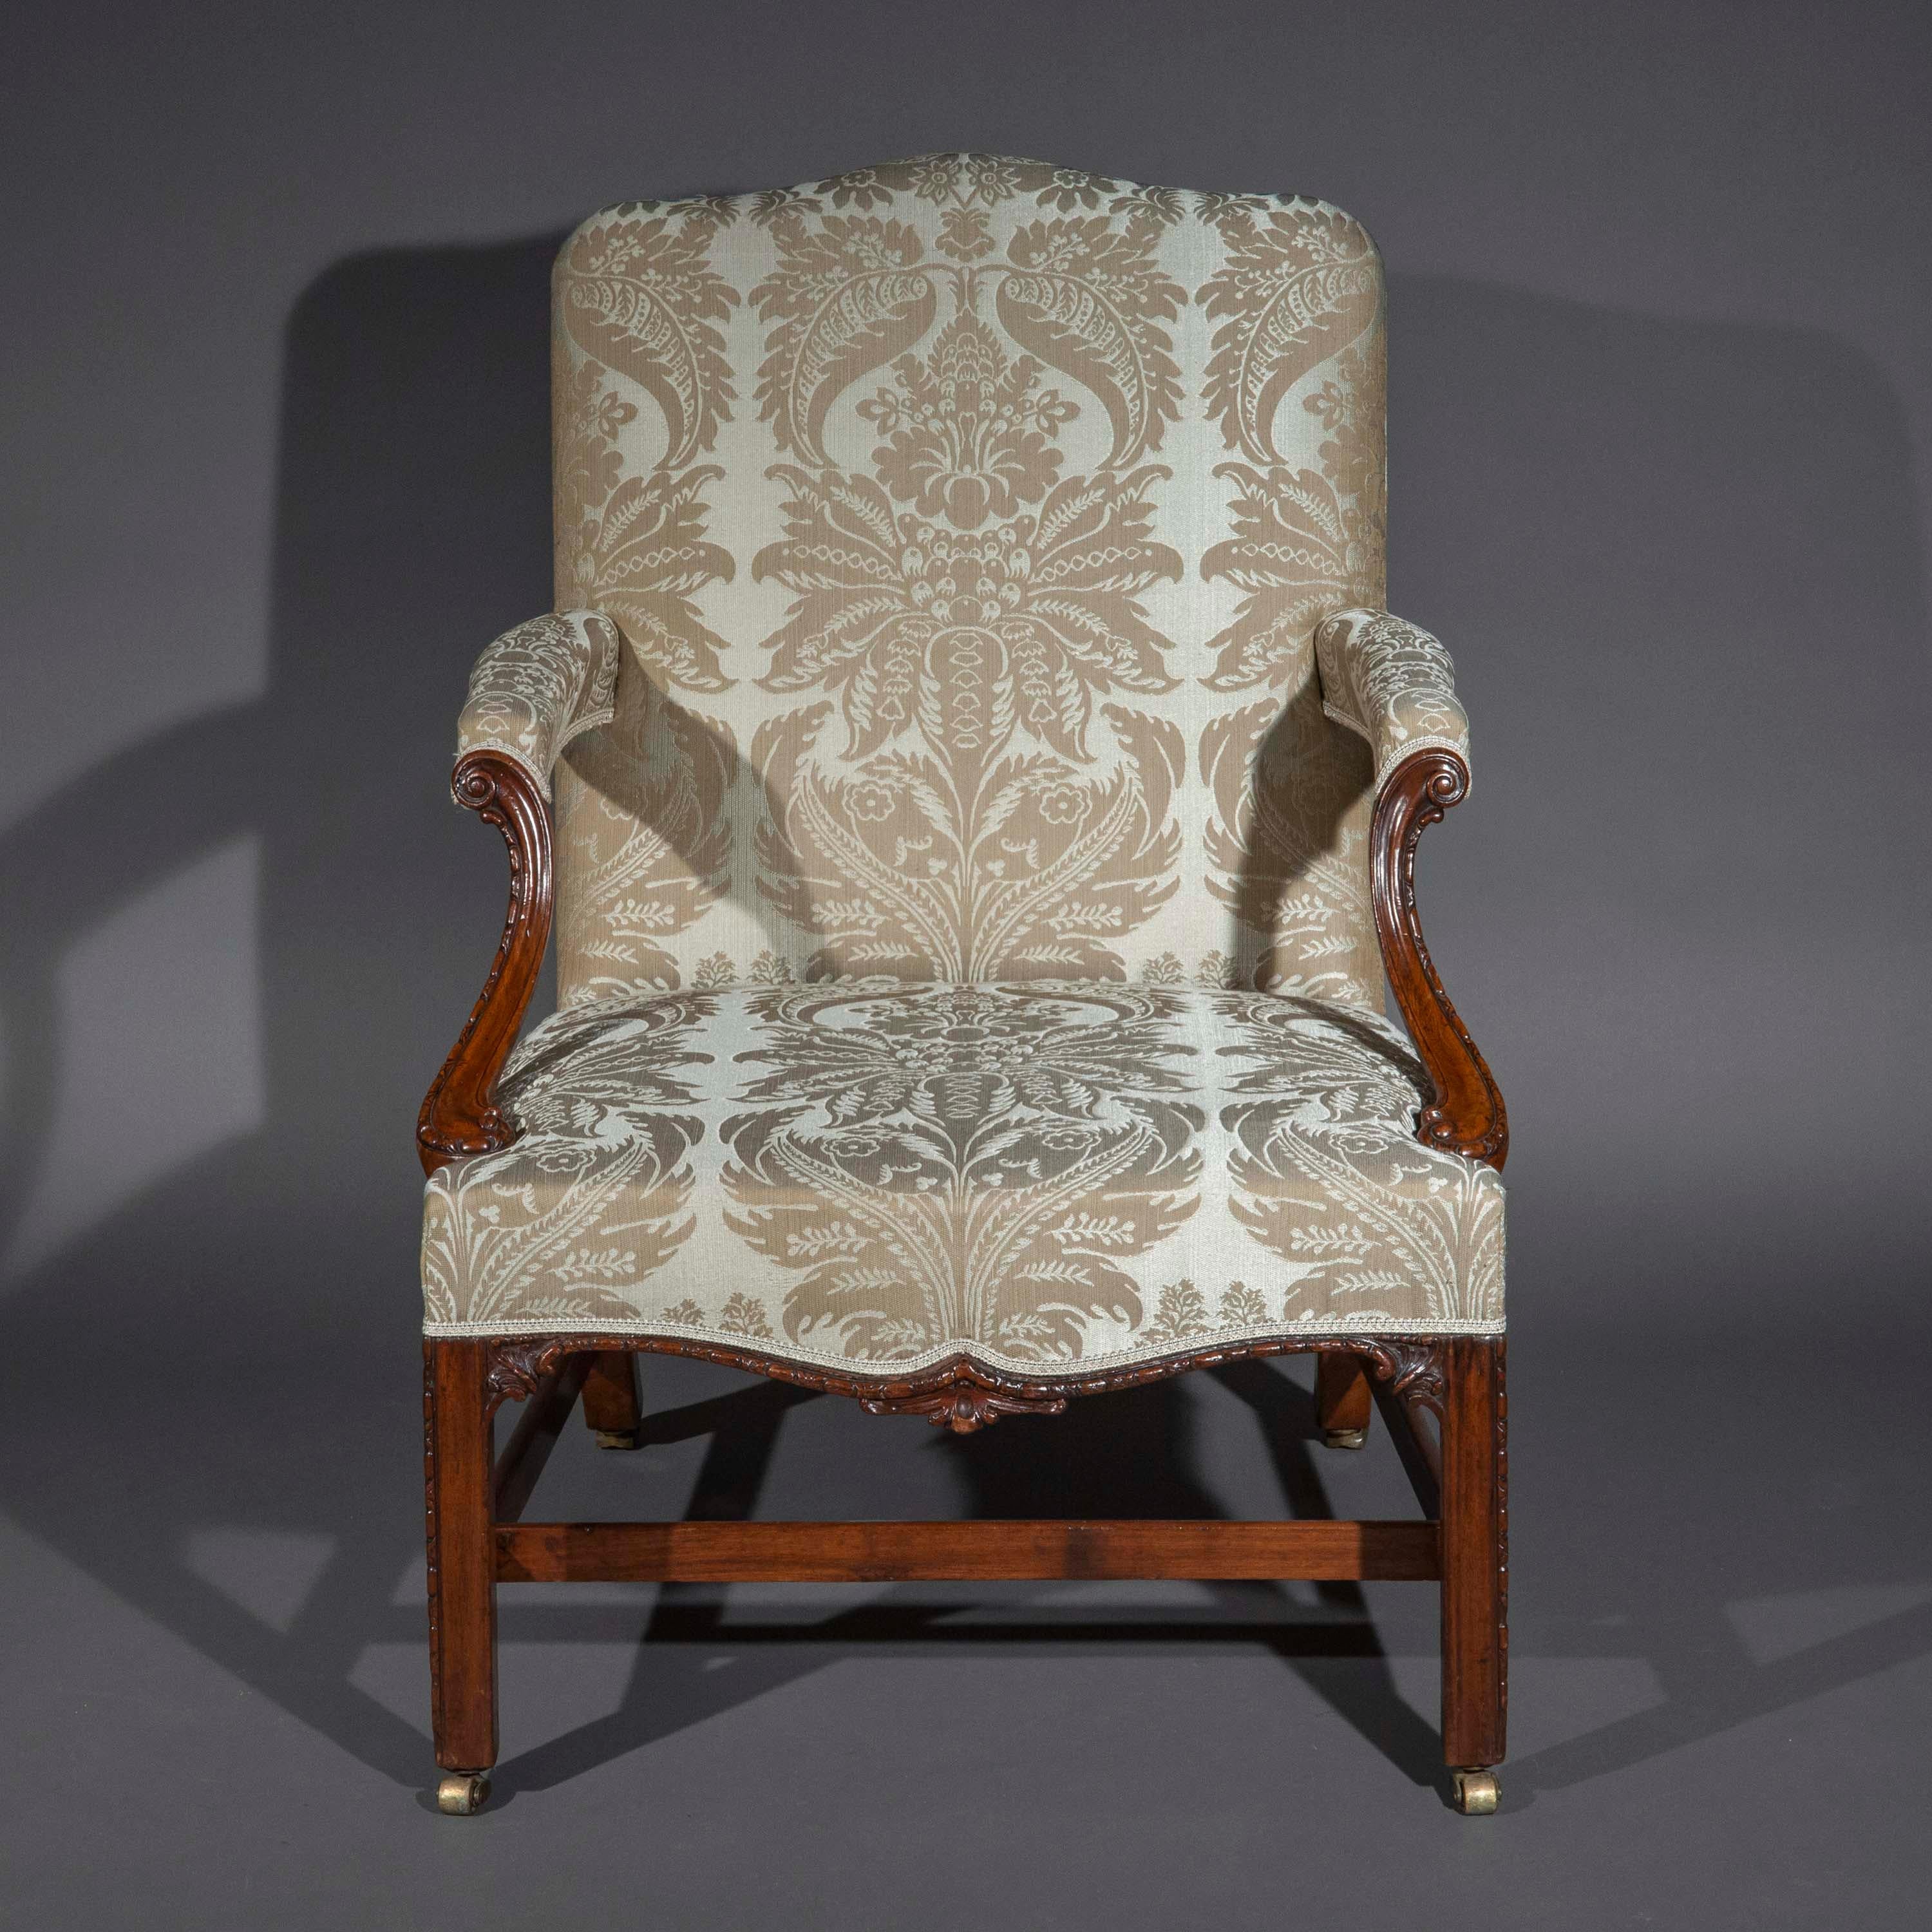 Large English Chippendale Gainsborough Armchair, mid-18th Century For Sale 12